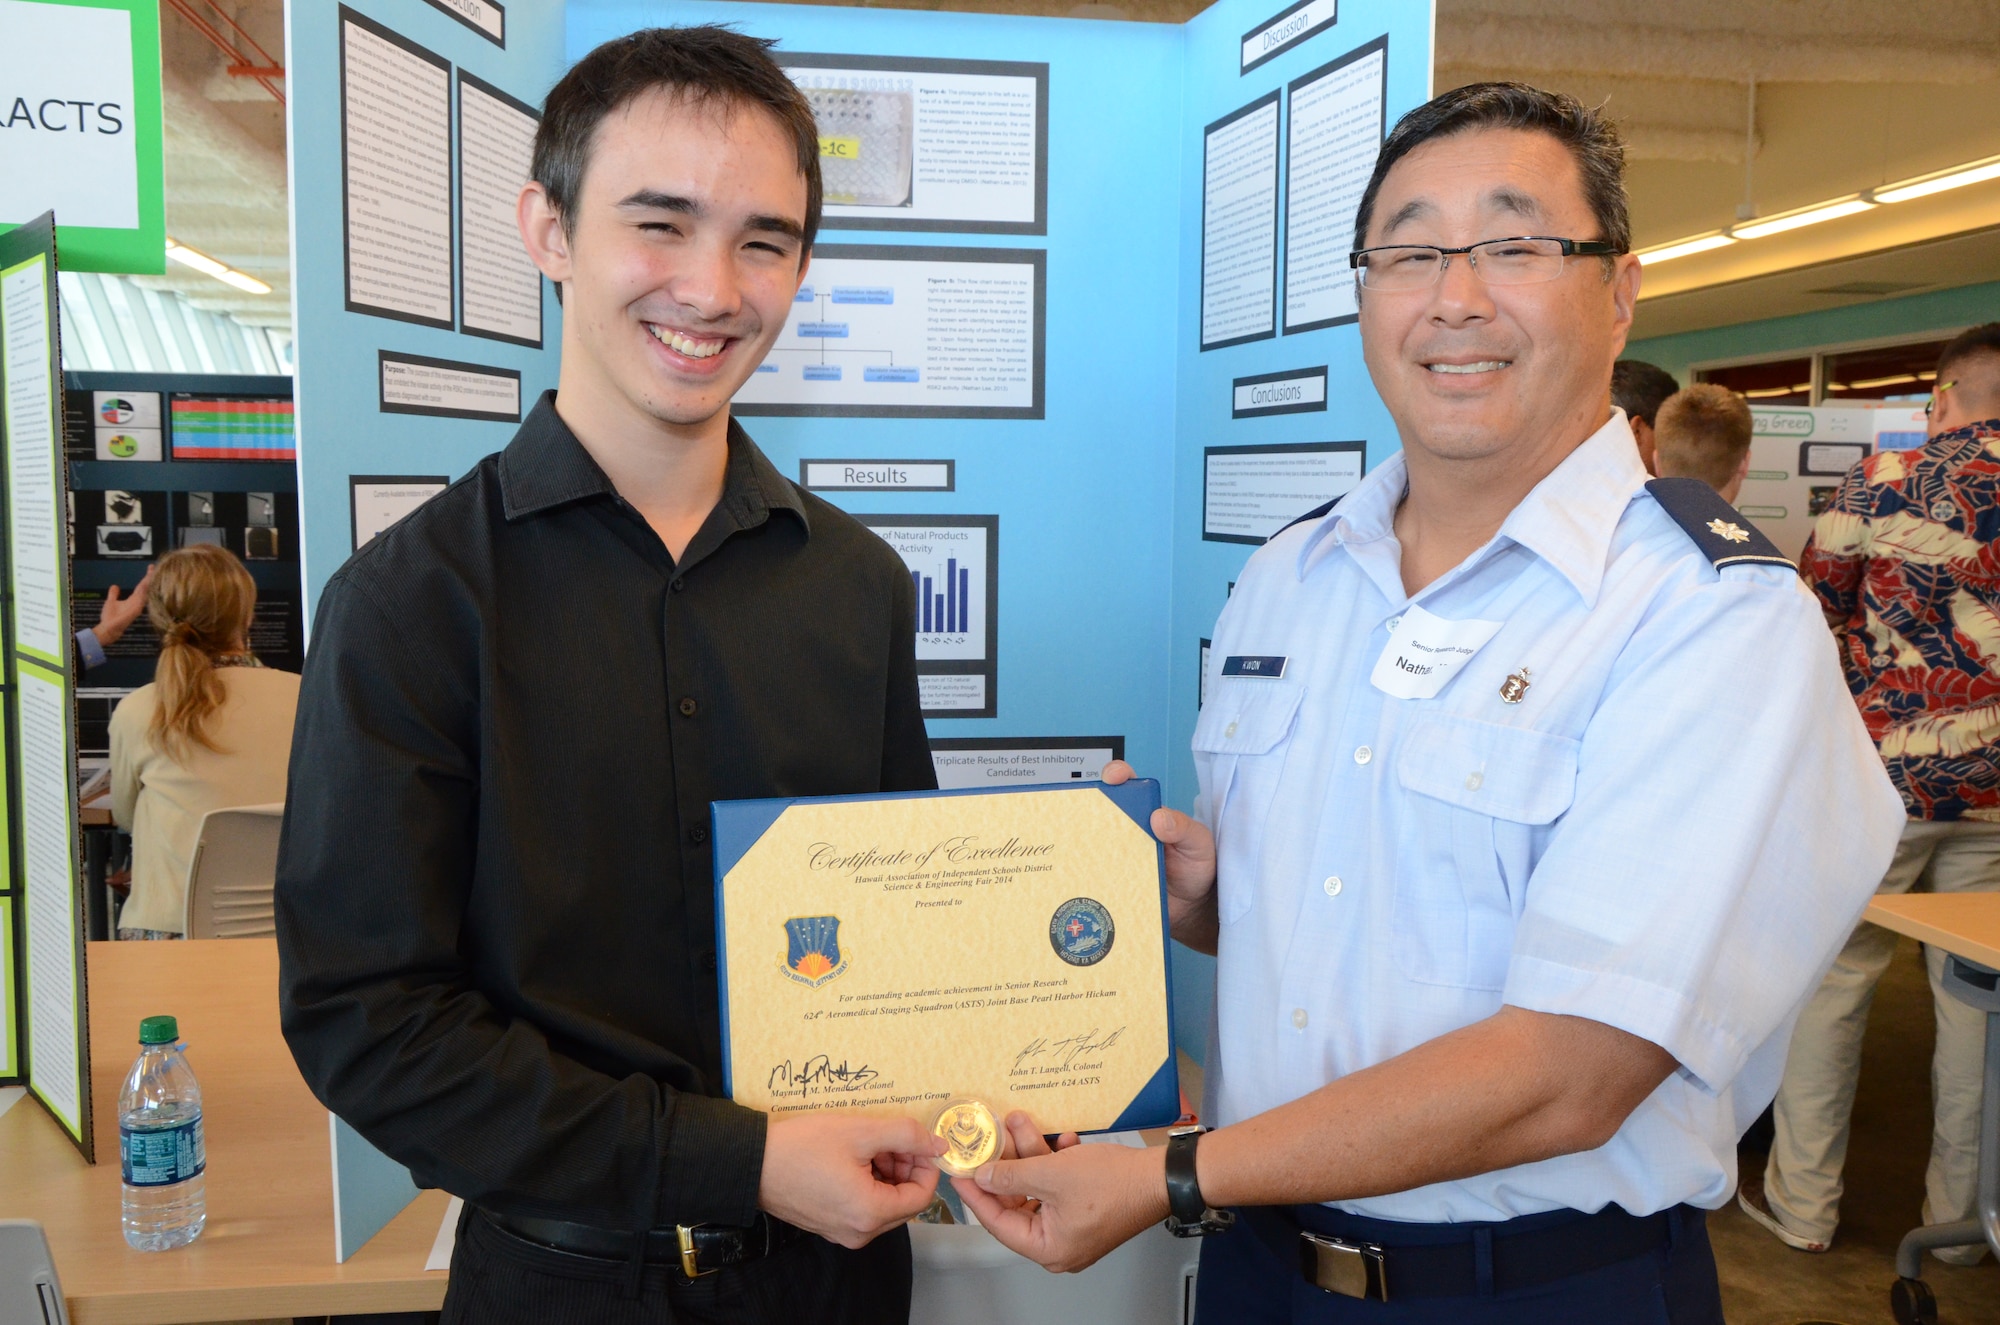 Lt. Col. Nathan Kwon, right, a Critical Care Air Transport Team (CCATT) physician with the 624th Aeromedical Staging Squadron, Joint Base Pearl Harbor-Hickam, Hawaii, presents an achievement award on behalf of his Air Force Reserve unit to a senior at Kamehameha Schools, Nathan, left, at the Hawaii Association of Independent Schools (HAIS) District Science & Engineering Fair held at Ioloni School, Honolulu, Hawaii, Feb. 8, 2014. Kwon’s role as a judge at the fair was to support and encourage achievements of Hawaii's youth in science, technology, engineering, math, and medicine (STEMM). Nathan advanced to the state-level competition. (U.S. Air Force photo by Tech. Sgt. Phyllis Keith)